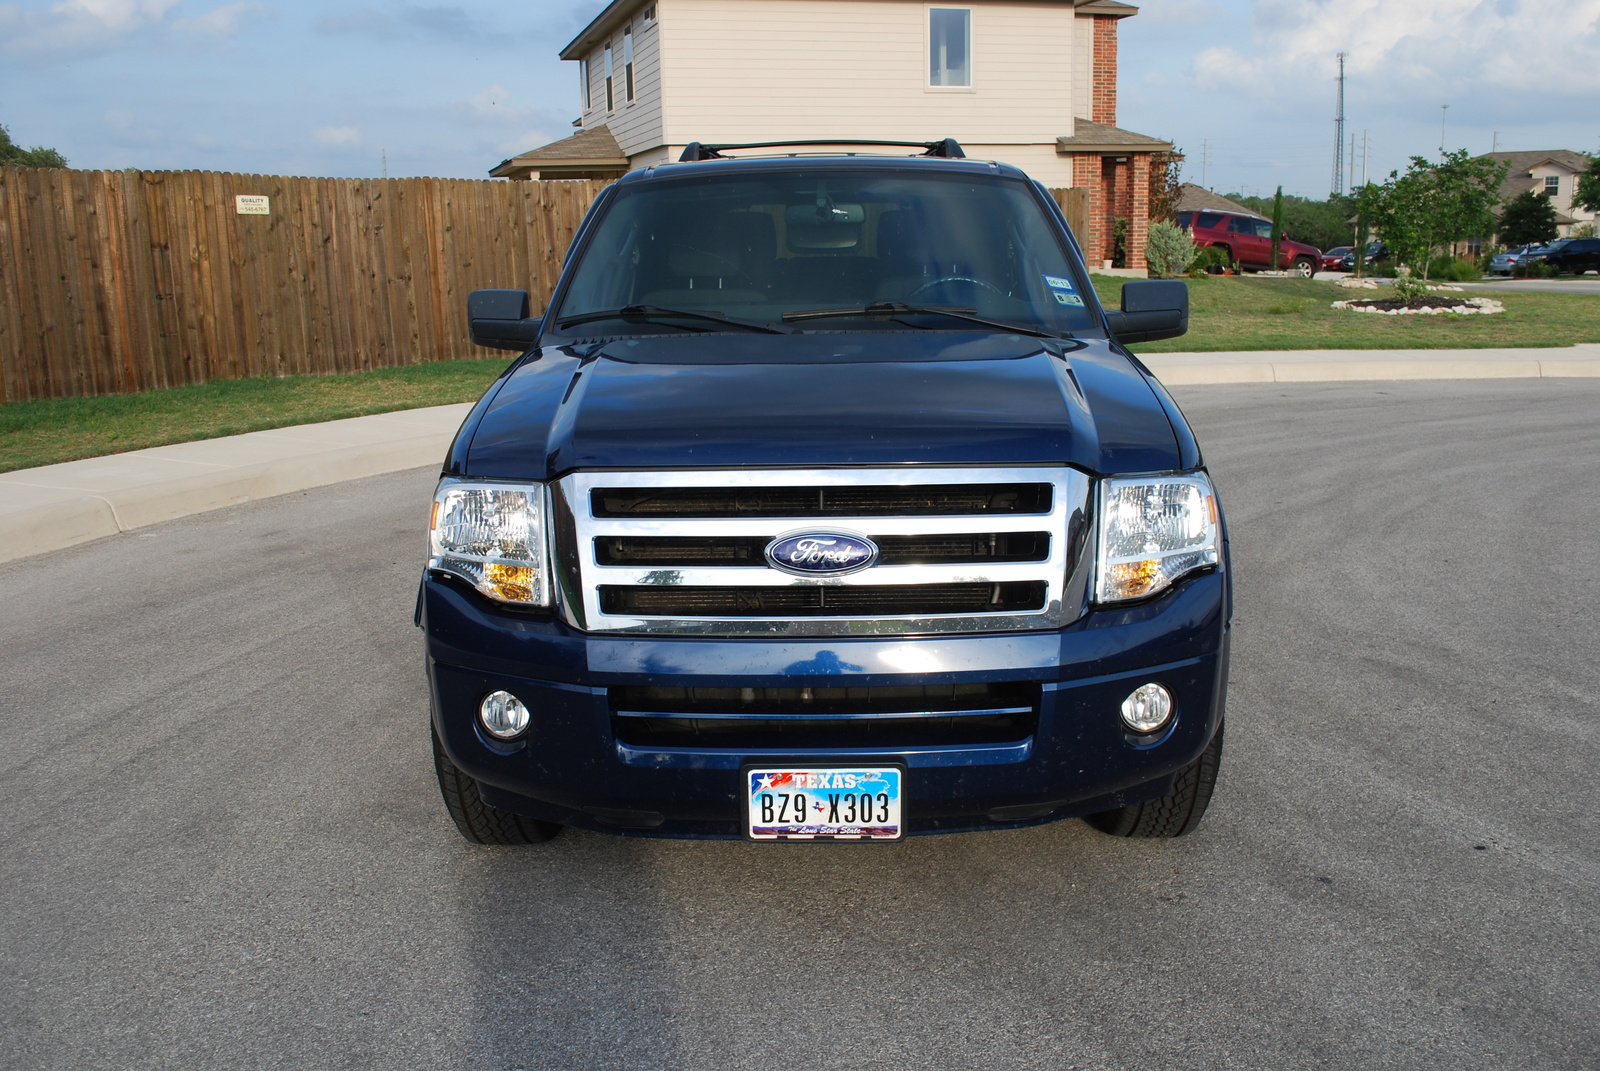 2009 Ford expedition el eddie bauer review #7